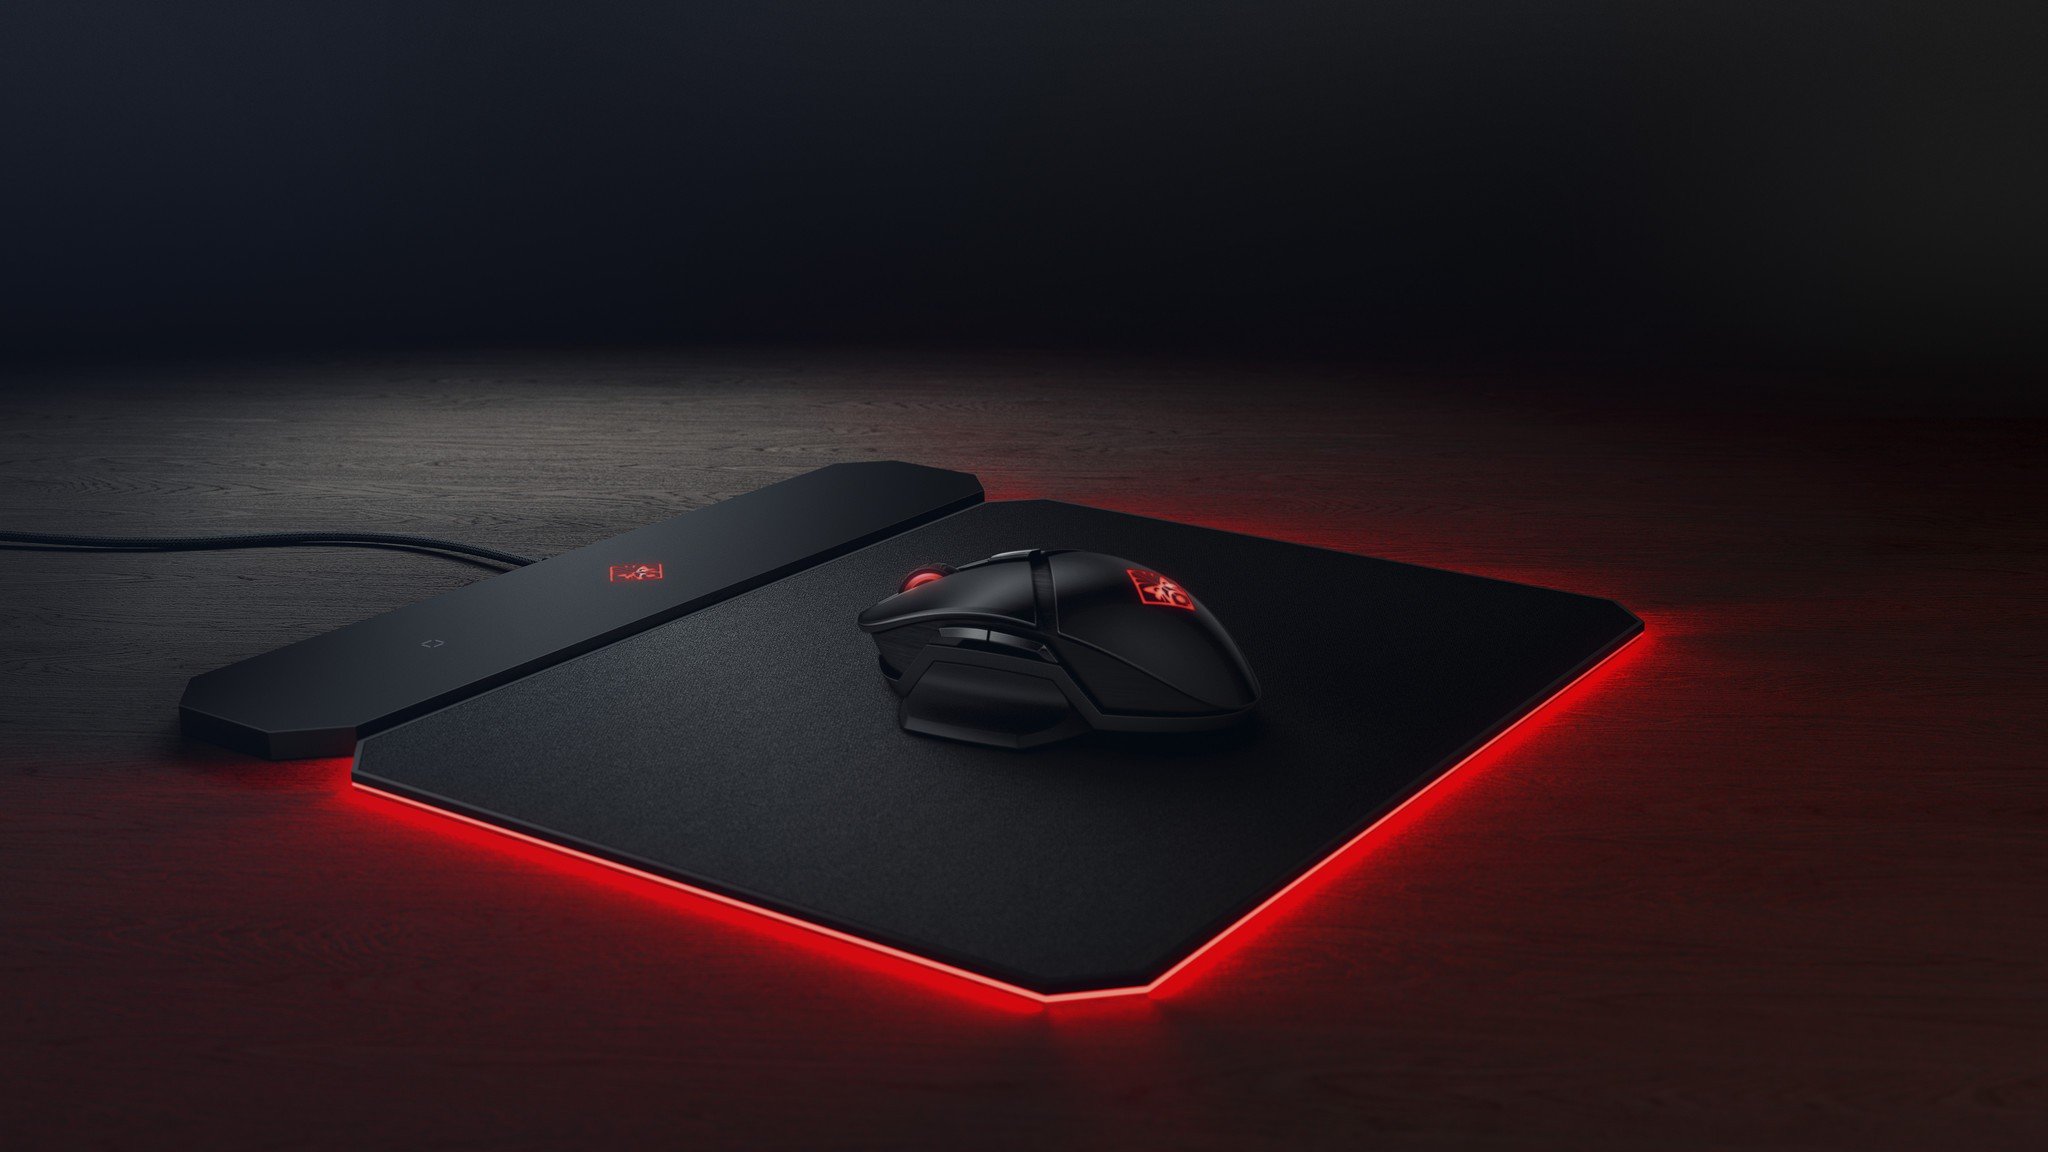 HP's Outpost and Photon pair Qi wireless charging with a gaming mouse